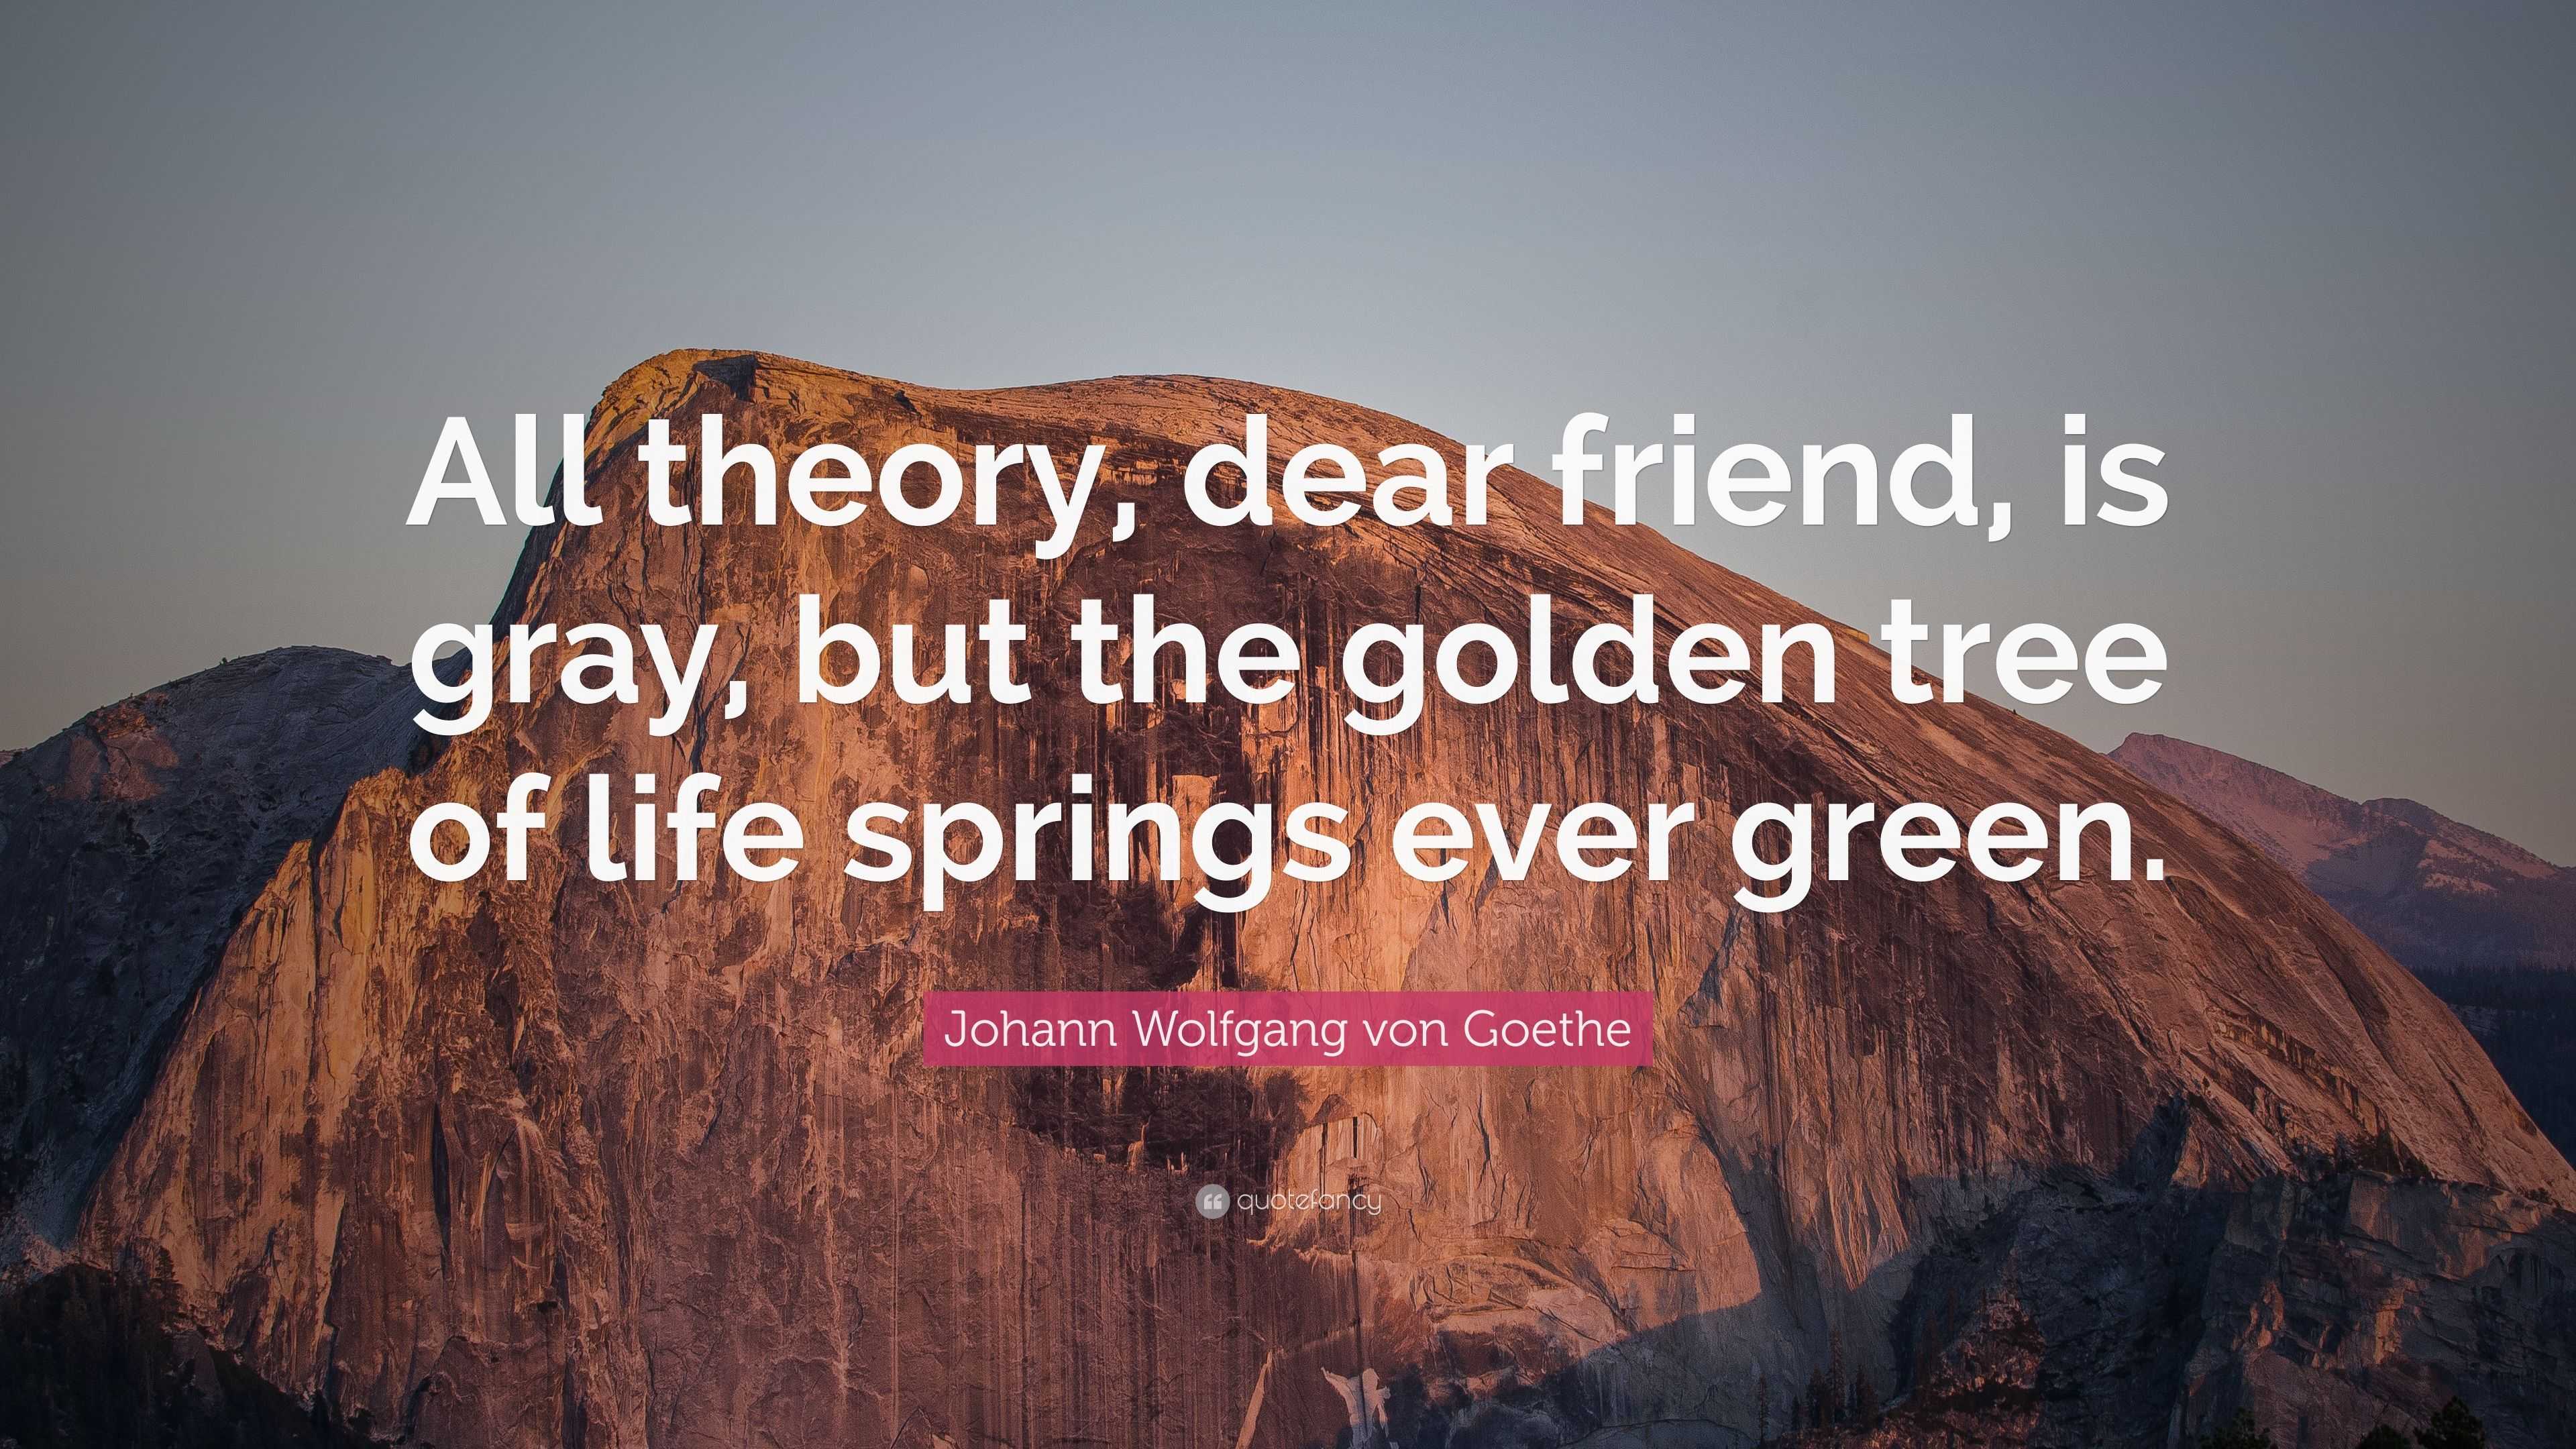 Johann Wolfgang von Goethe Quote “All theory dear friend is gray